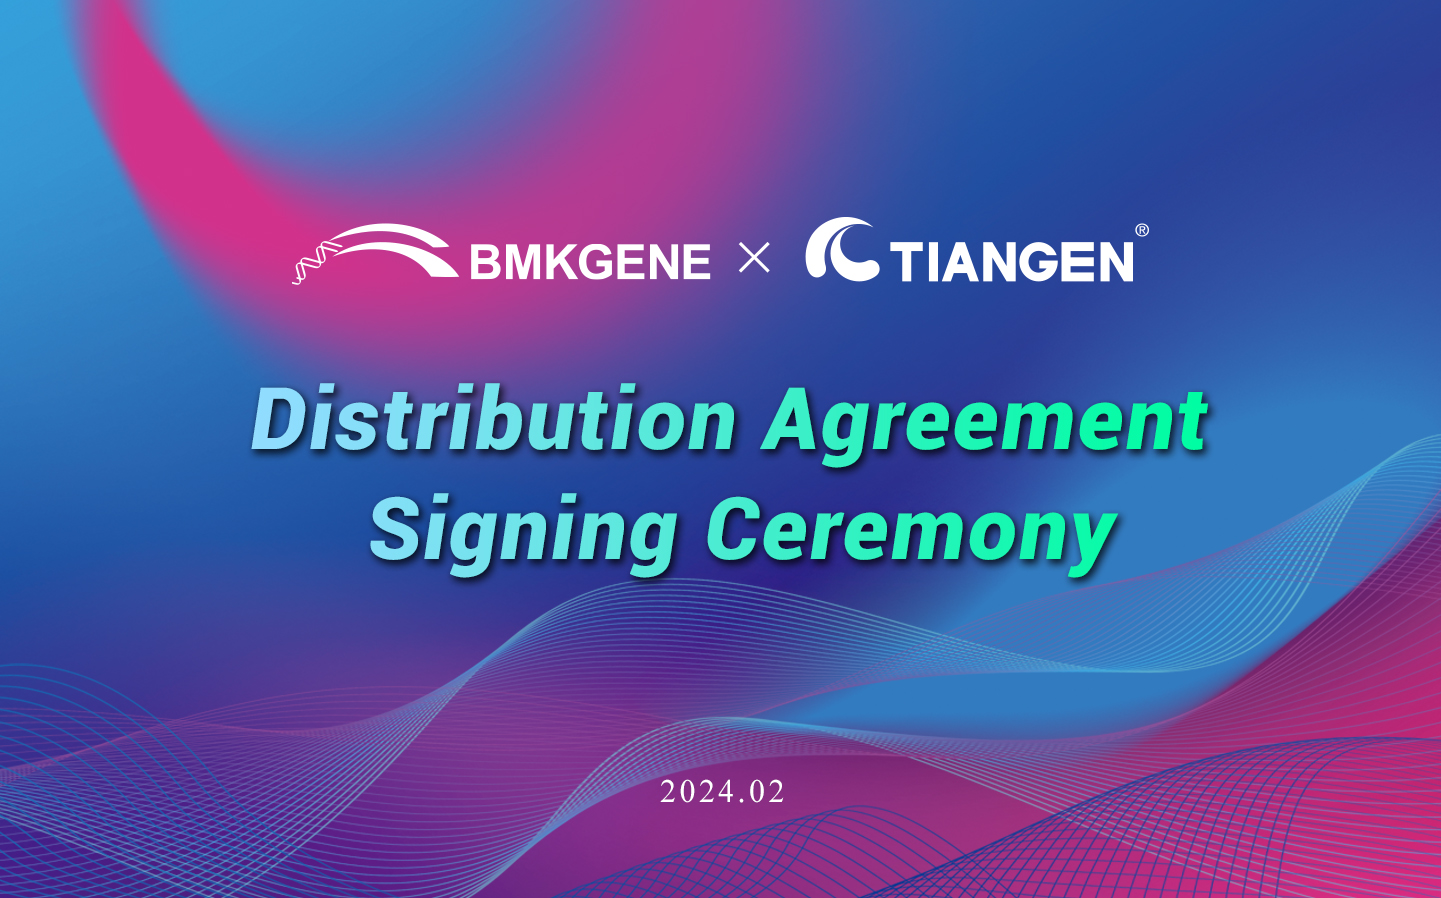 Biomarker Technologies and TIANGEN Biotech signed a strategic cooperation agreement in the European market